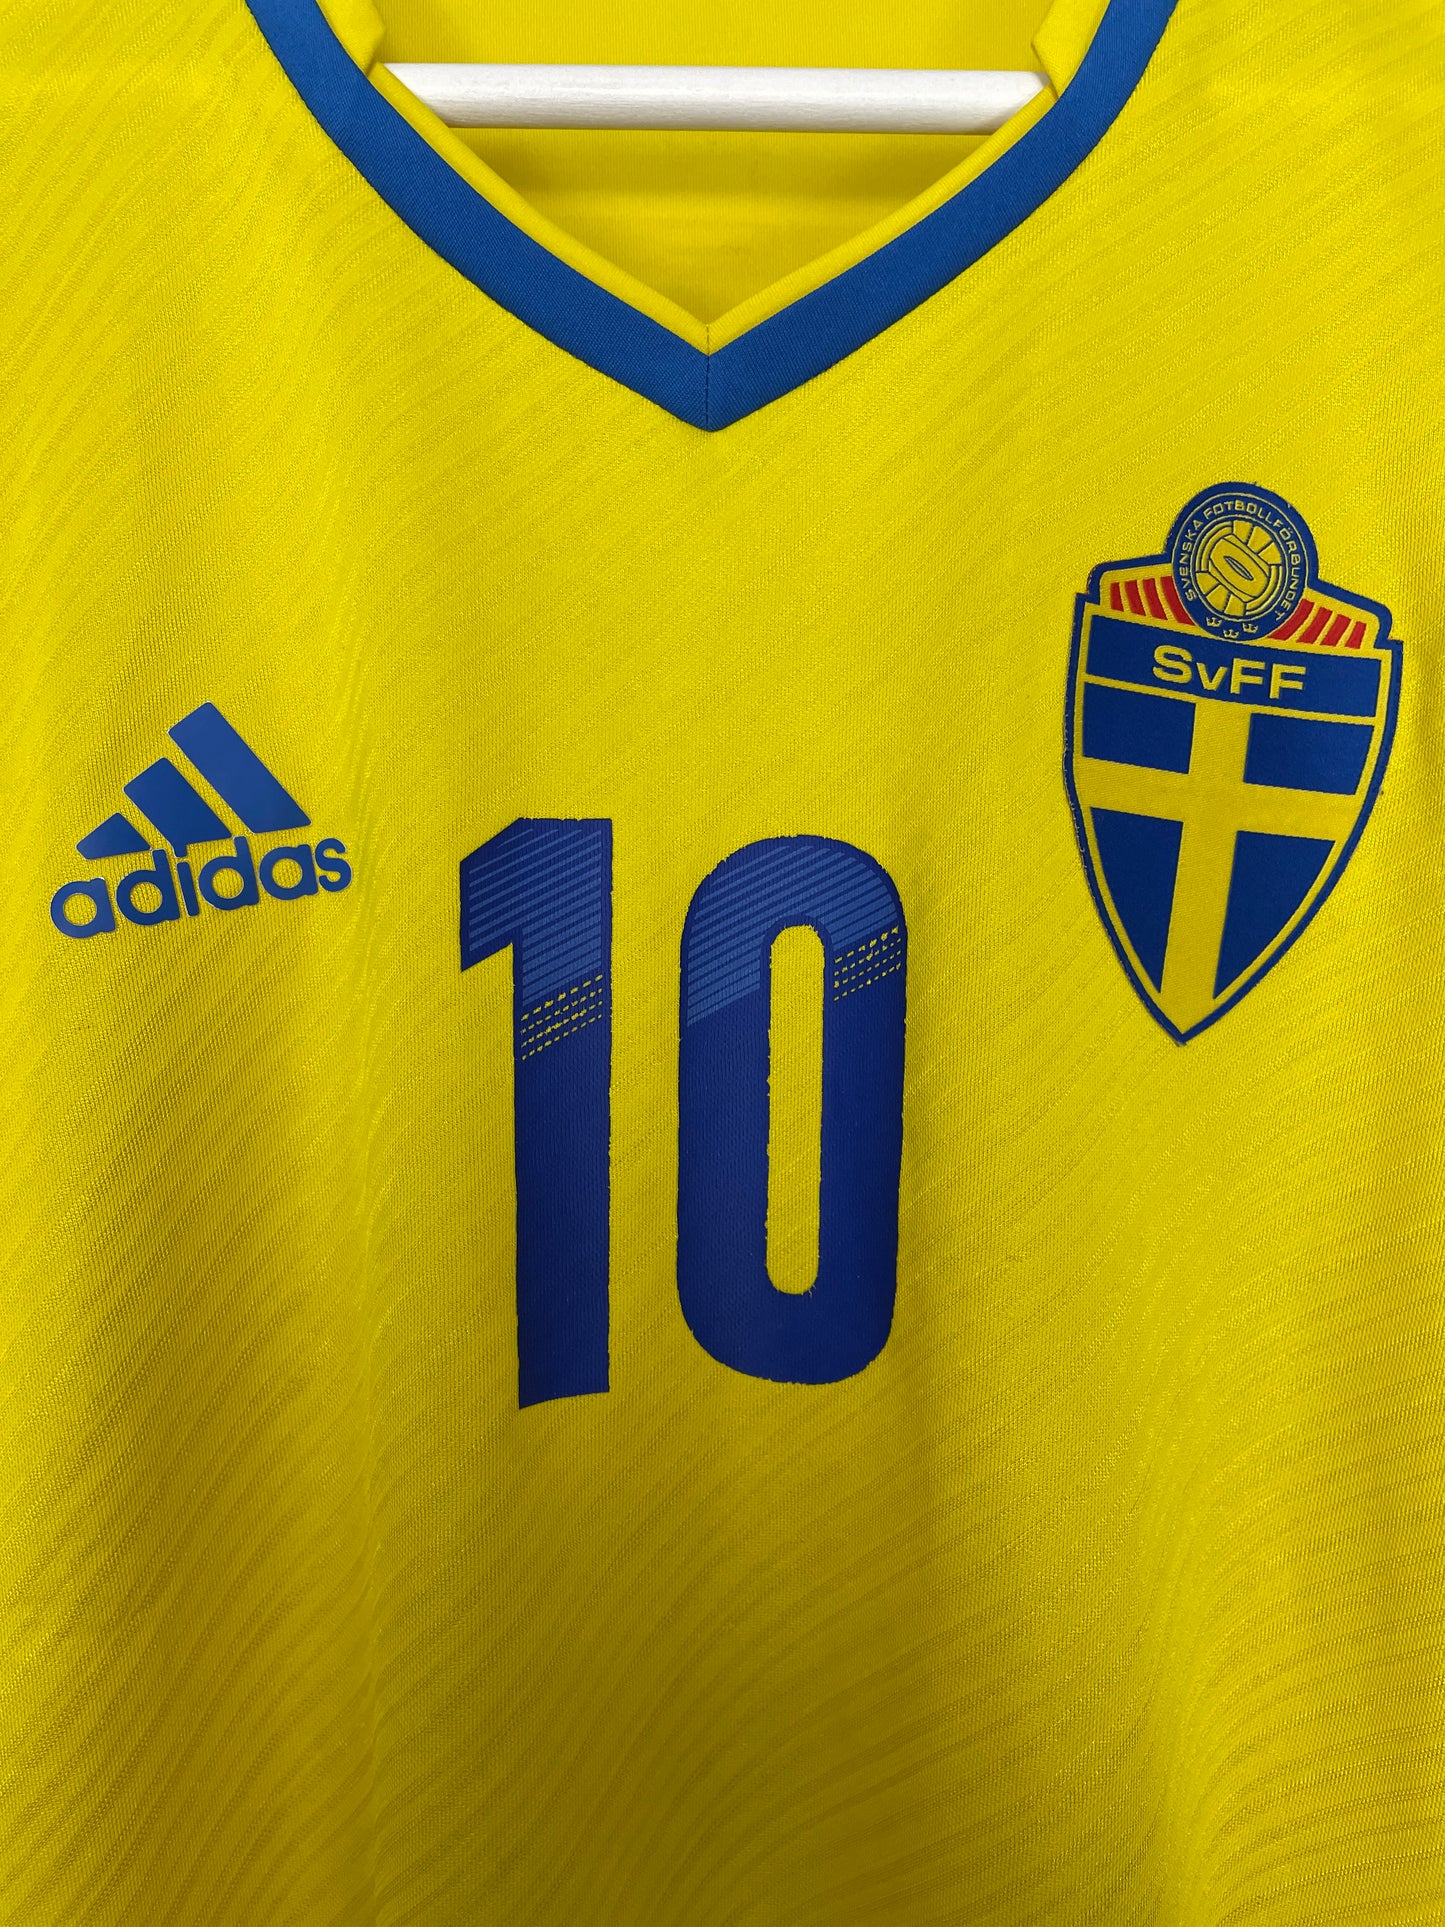 2016/17 SWEDEN #10 *PLAYER ISSUE* HOME SHIRT (M) ADIDAS